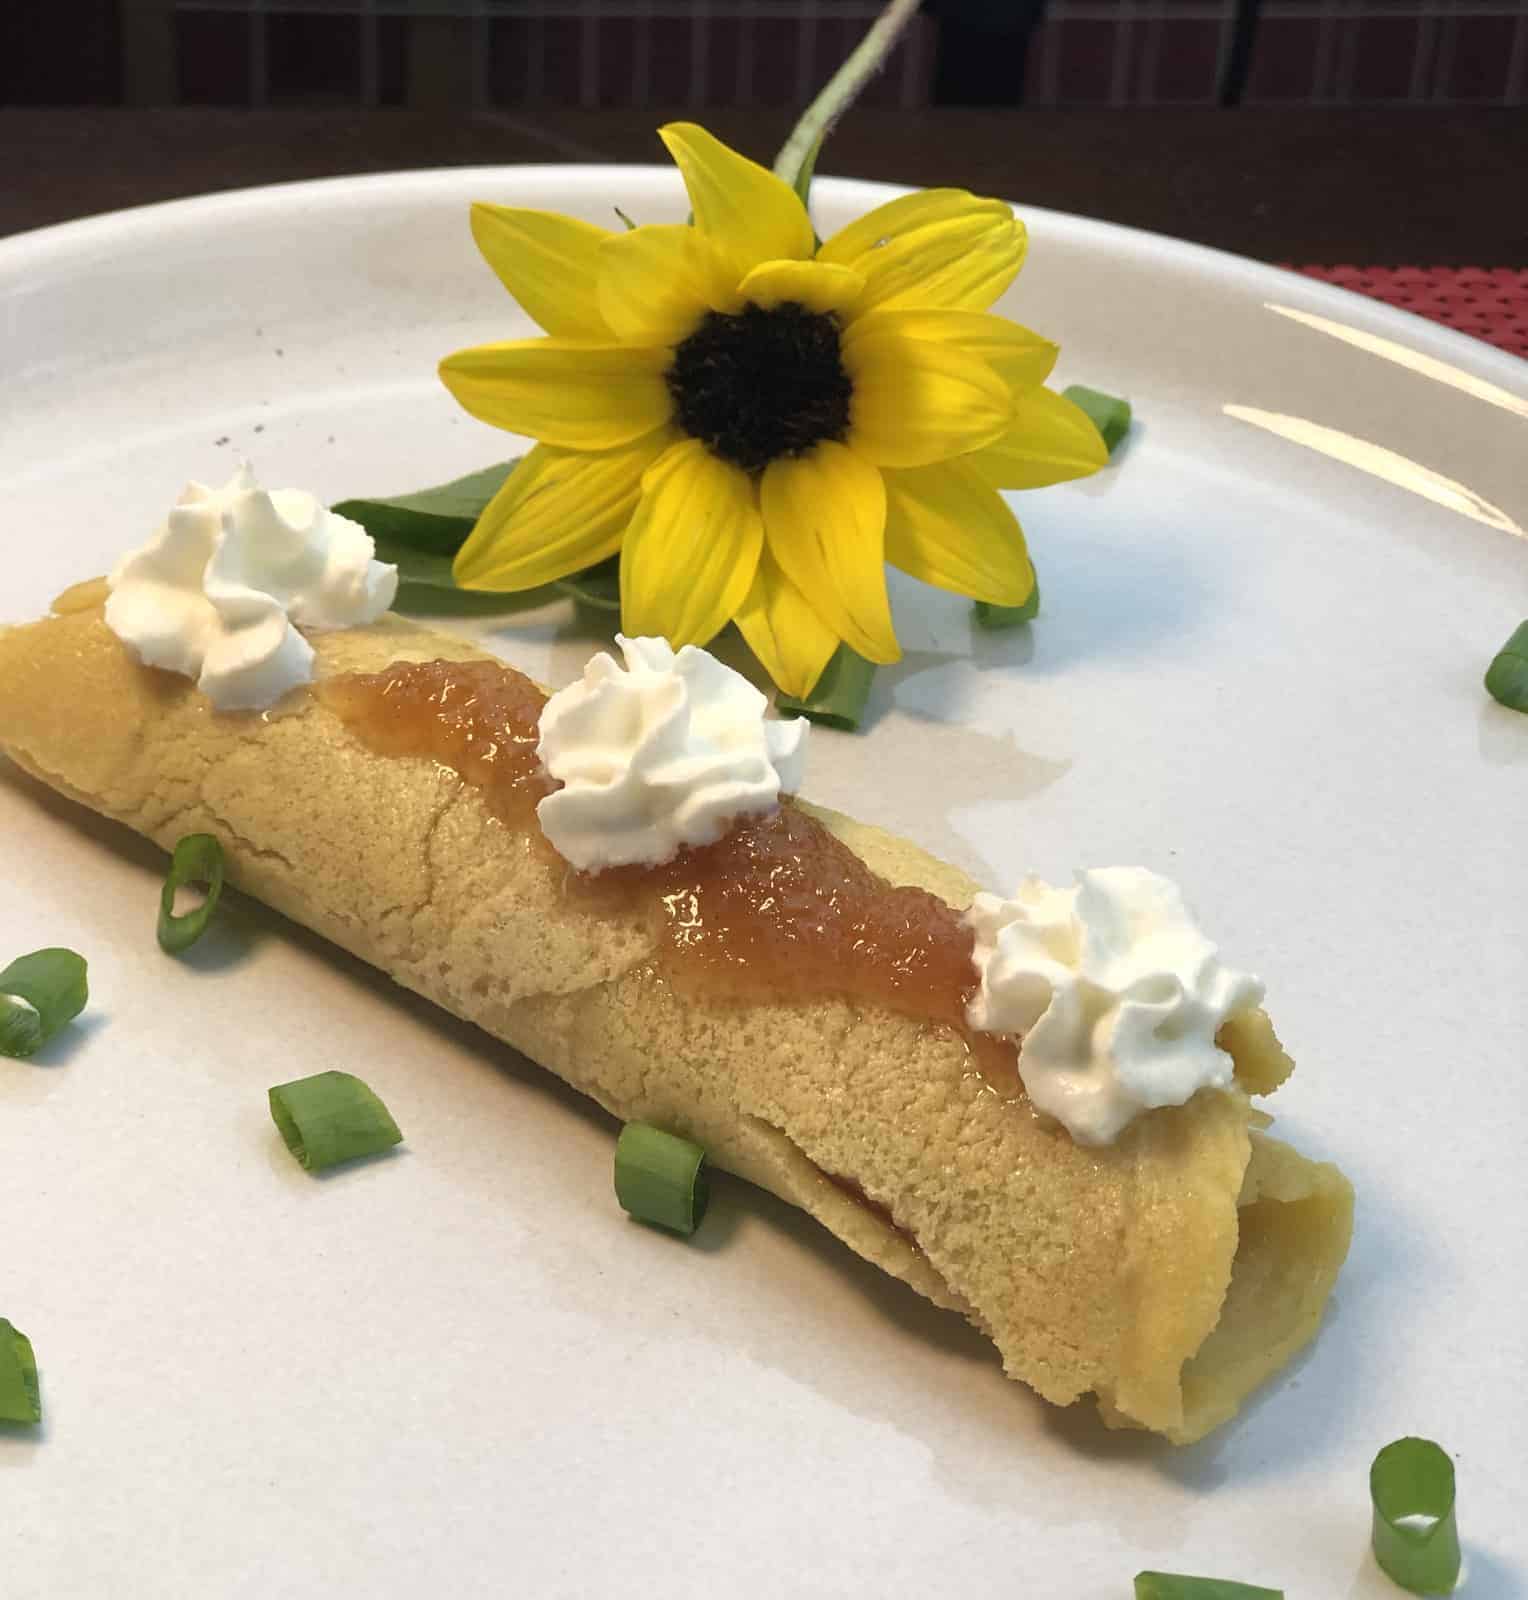  Chickpea Crepe with whipped cream and jelly on top sitting on a white plate with chives and a yellow flower